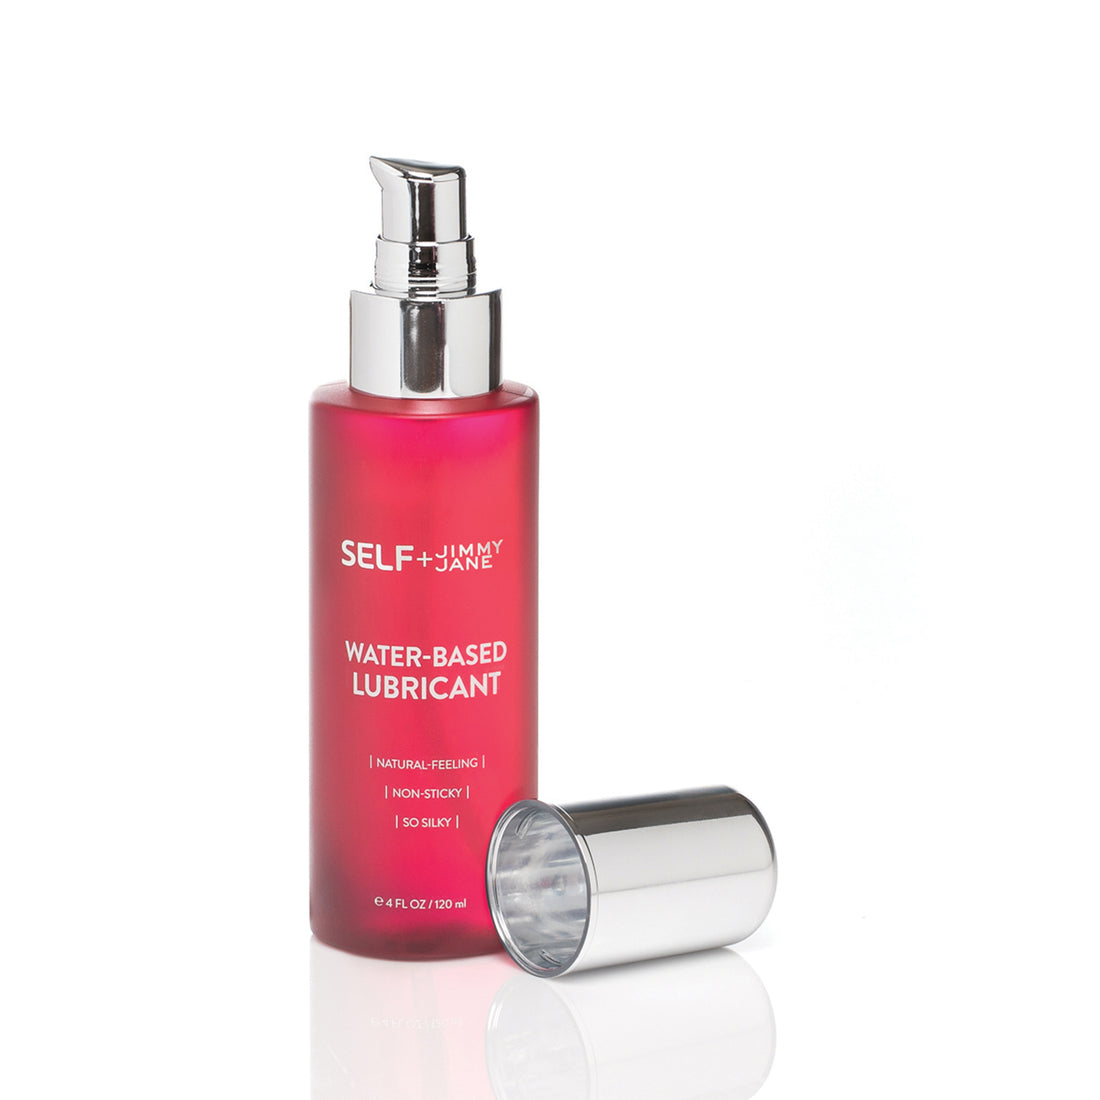 Self + Jimmyjane water-based personal lubricant in a red bottle Font facing